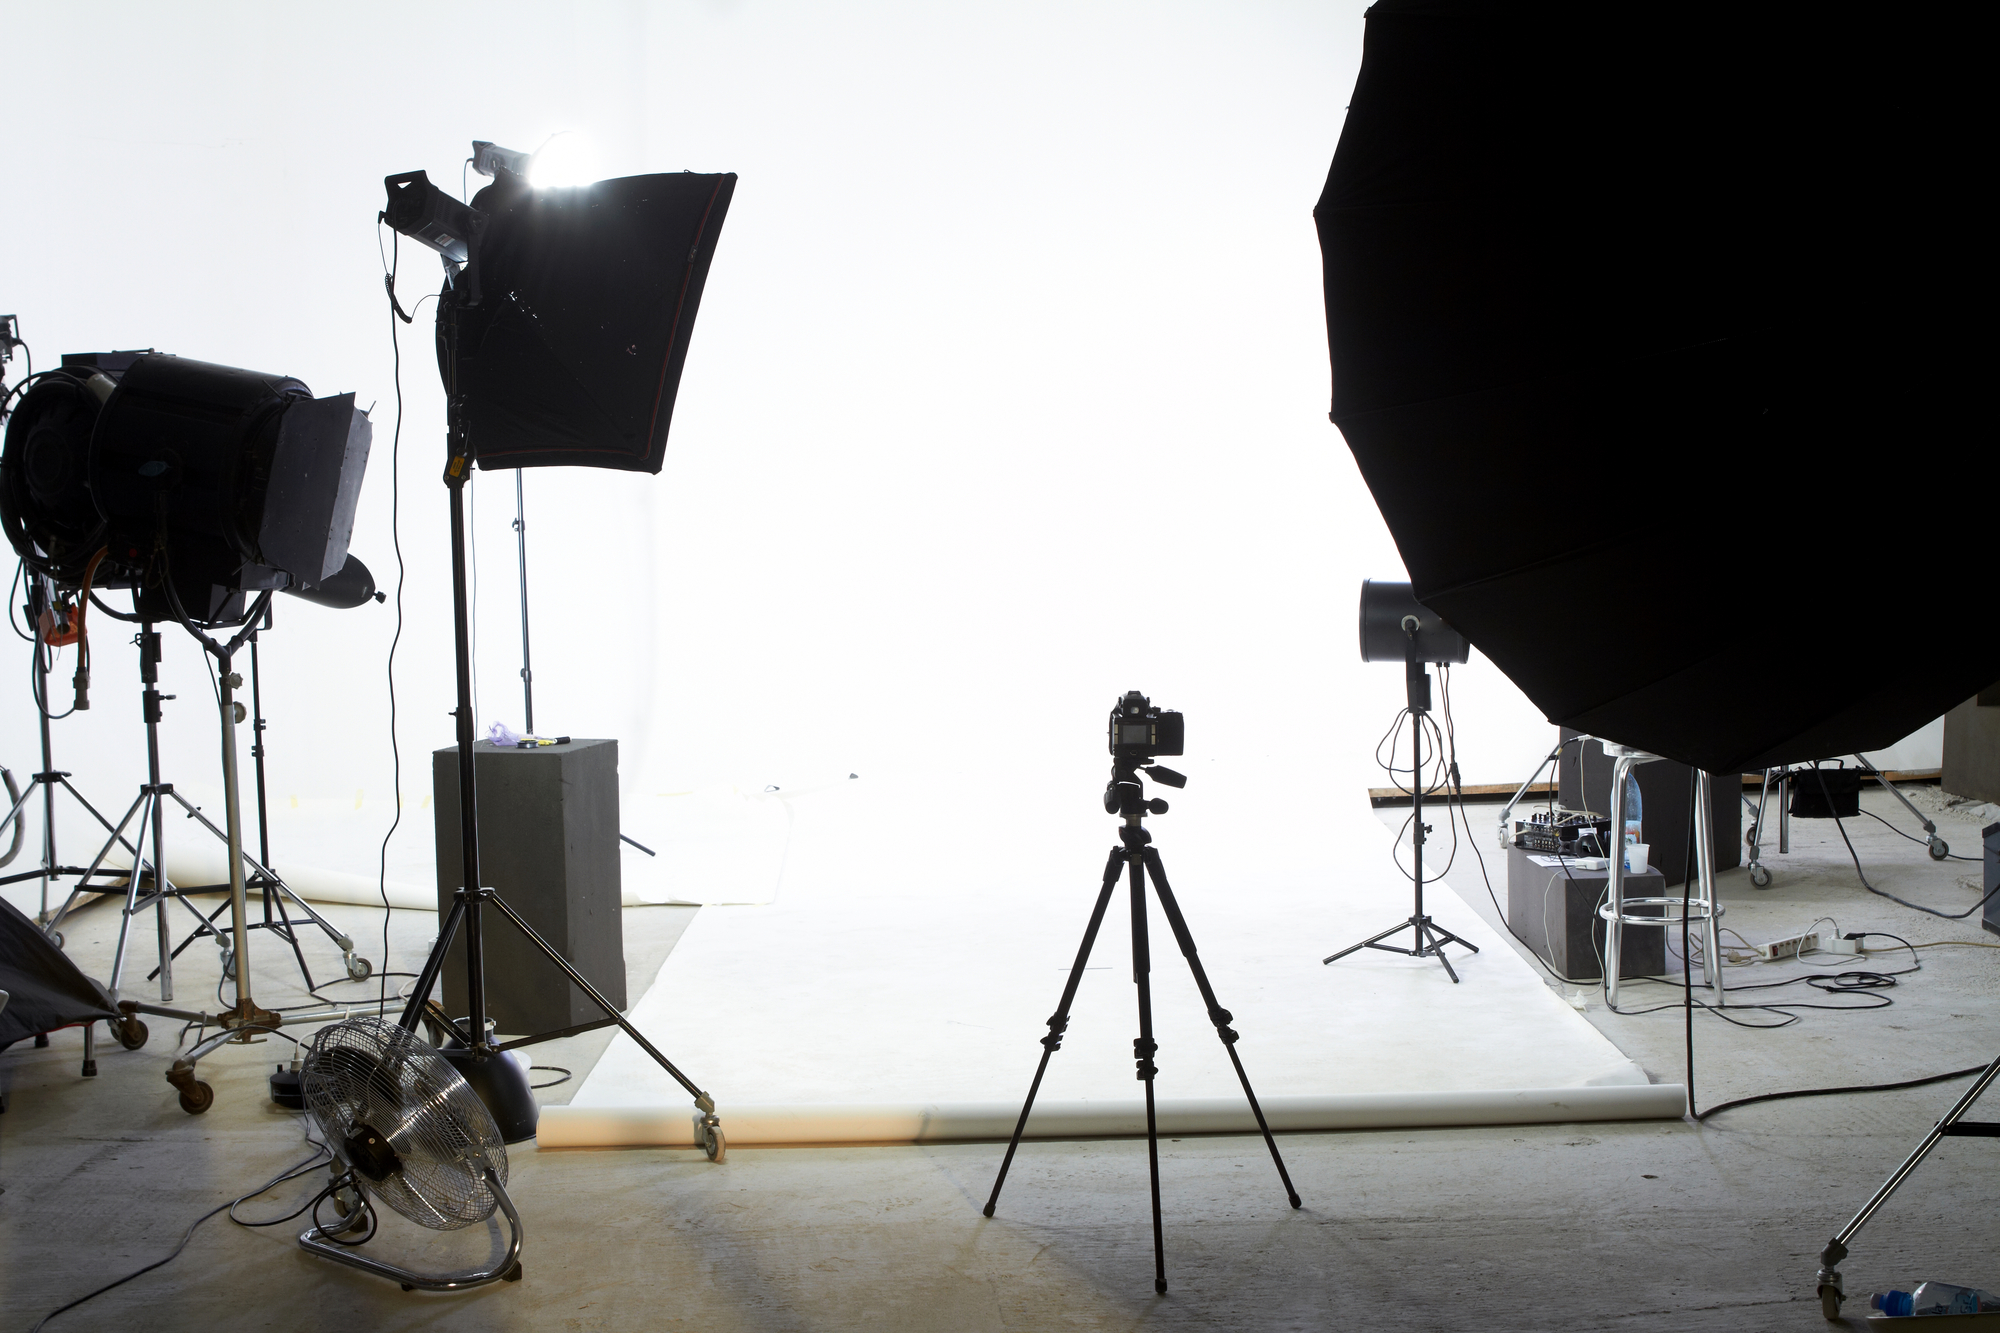 Professional photography studio interior, lights and camera targeting white backdrop.